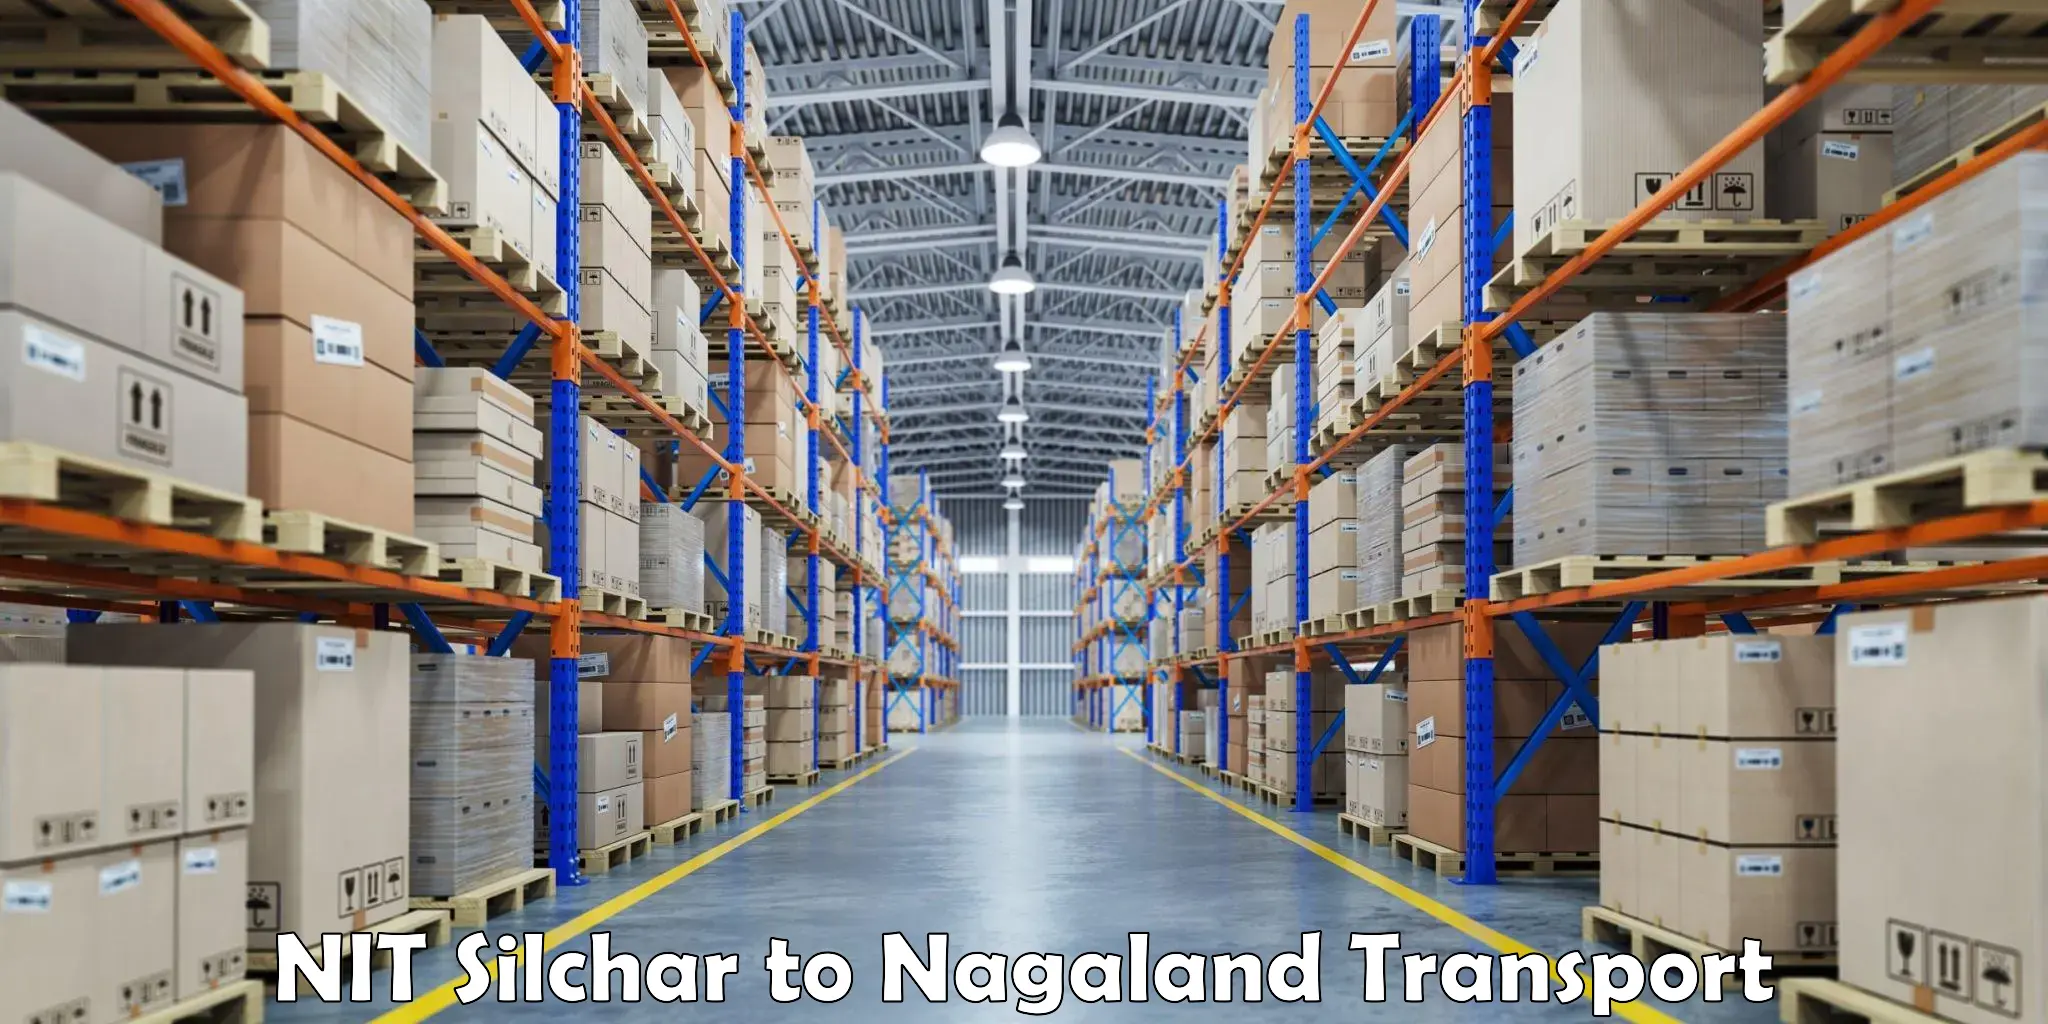 Goods delivery service NIT Silchar to Kohima